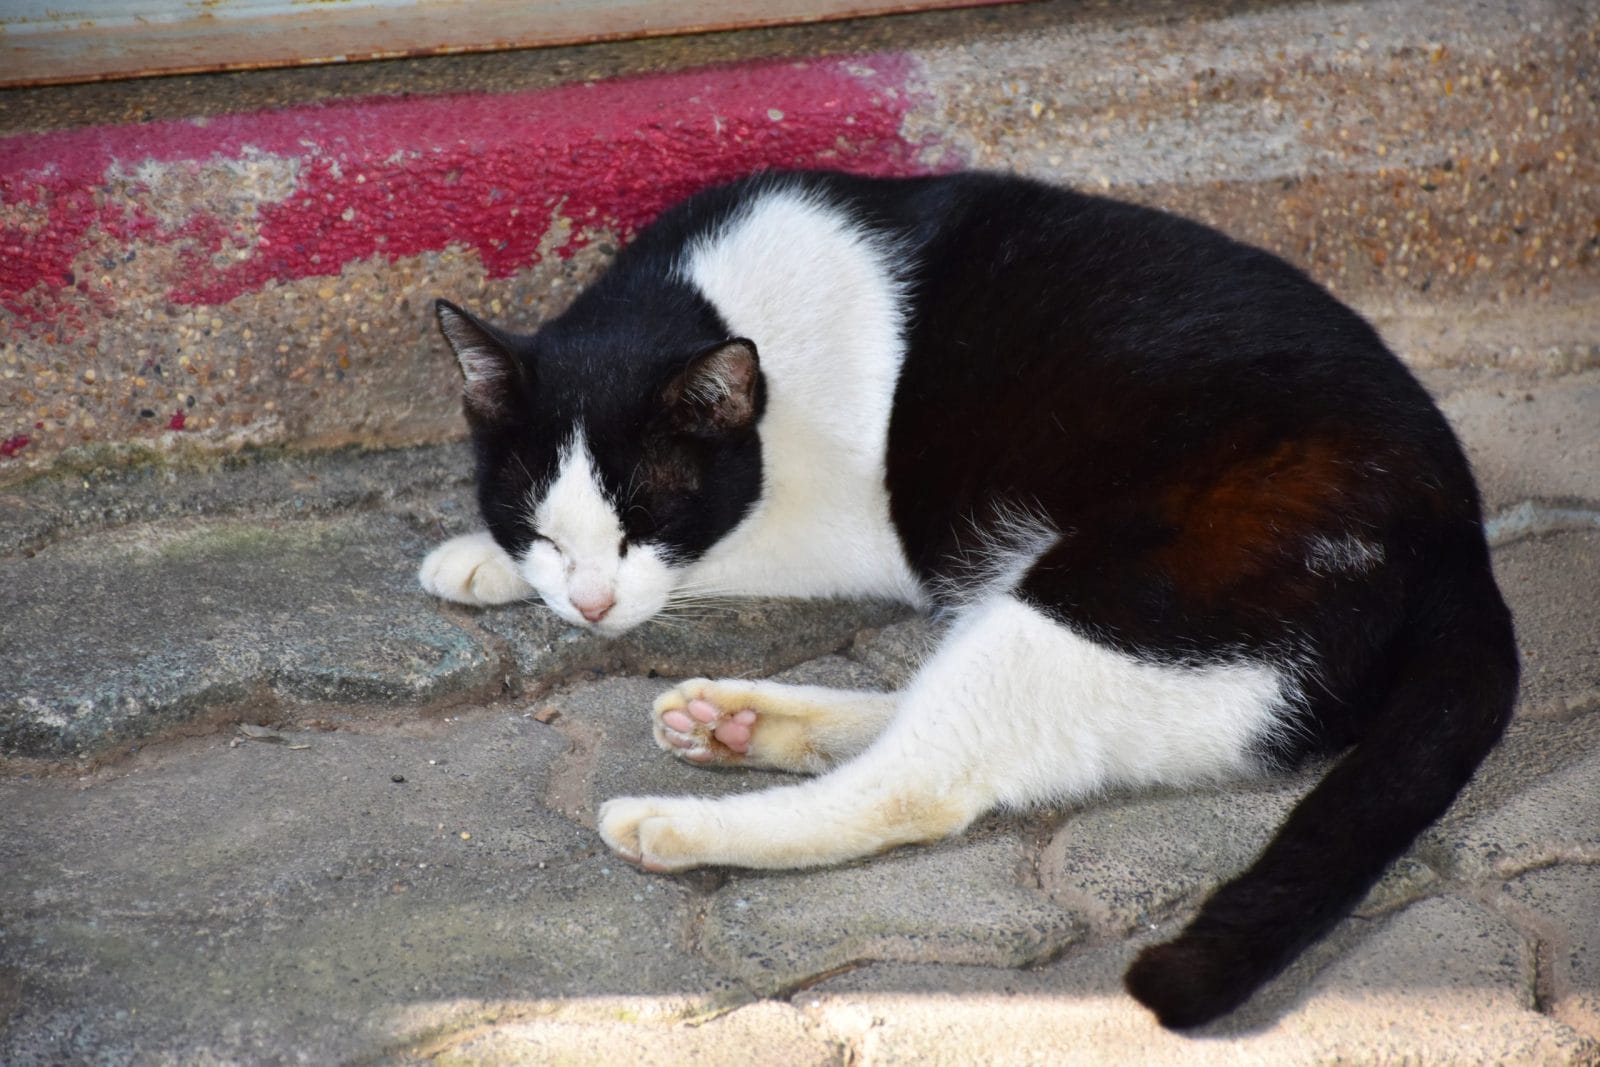 Little black and white cat sleeping on the pavement